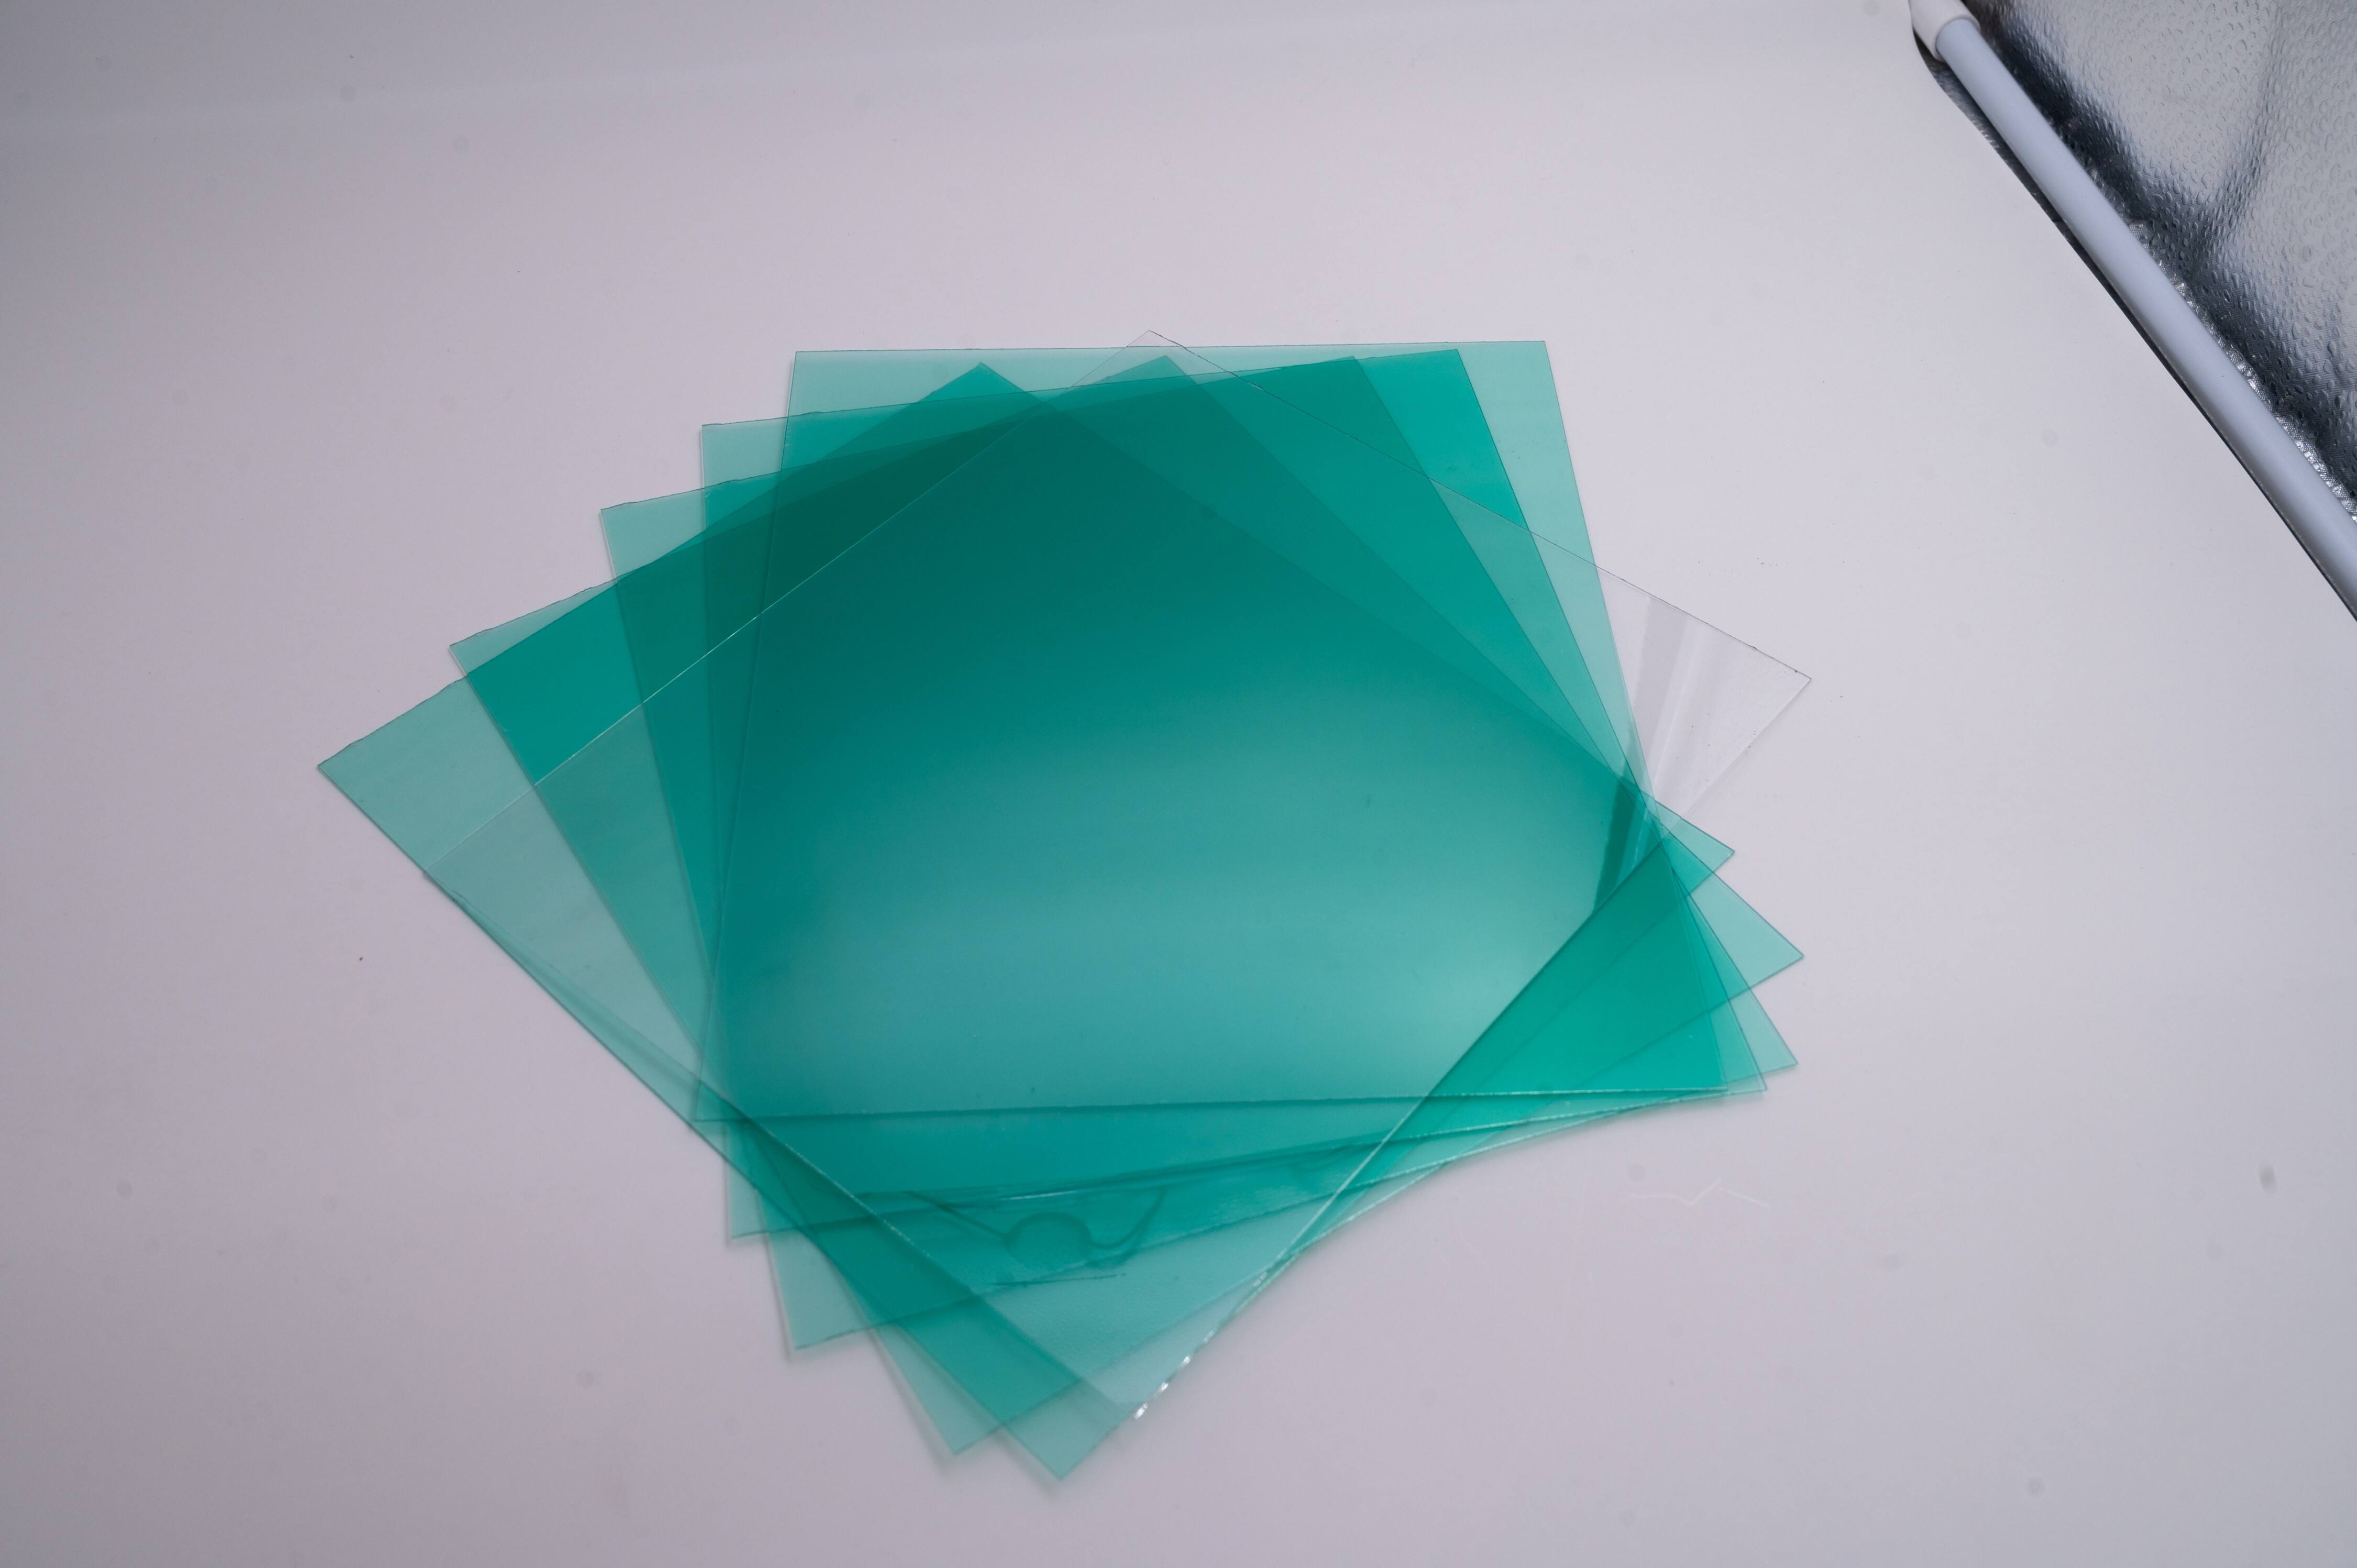 Andisco Hot Selling 30-40mm Transparent PMMA Acrylic Panels Colored Plastic Sheets with Cutting & Moulding Processing Service details